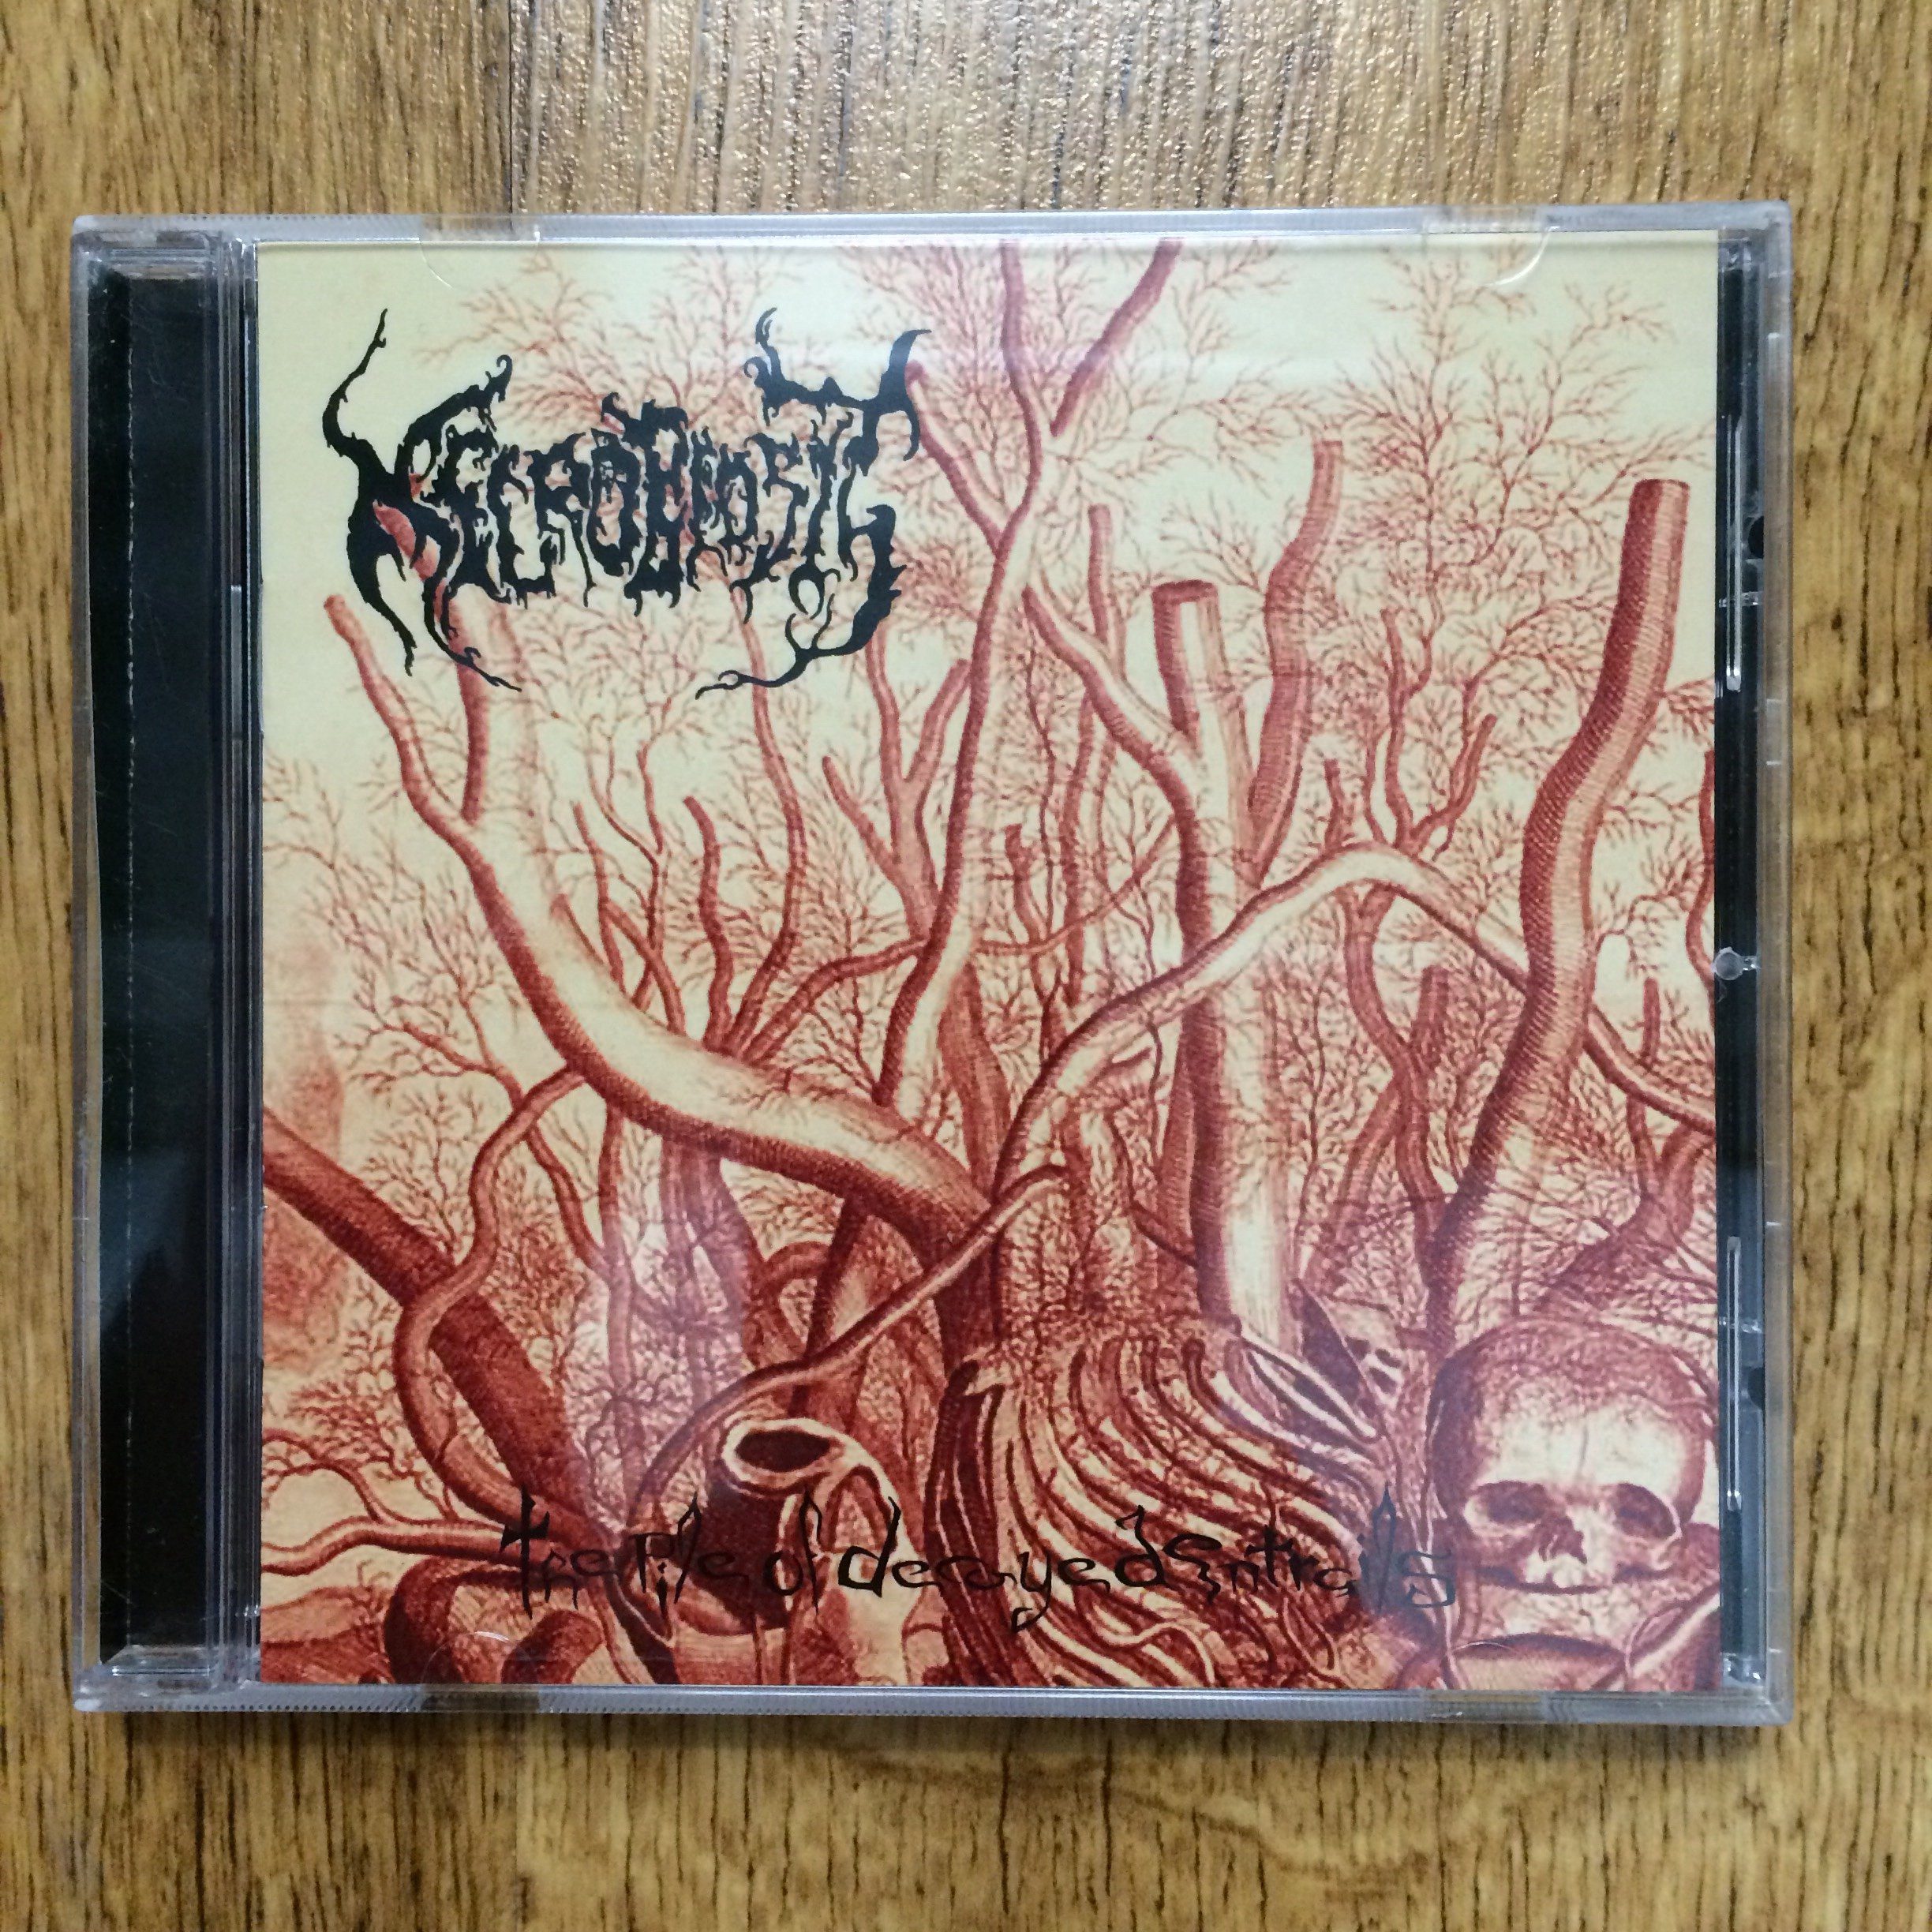 Photo of the Necrobiosis - "The Pile of Decayed Entrails" CD